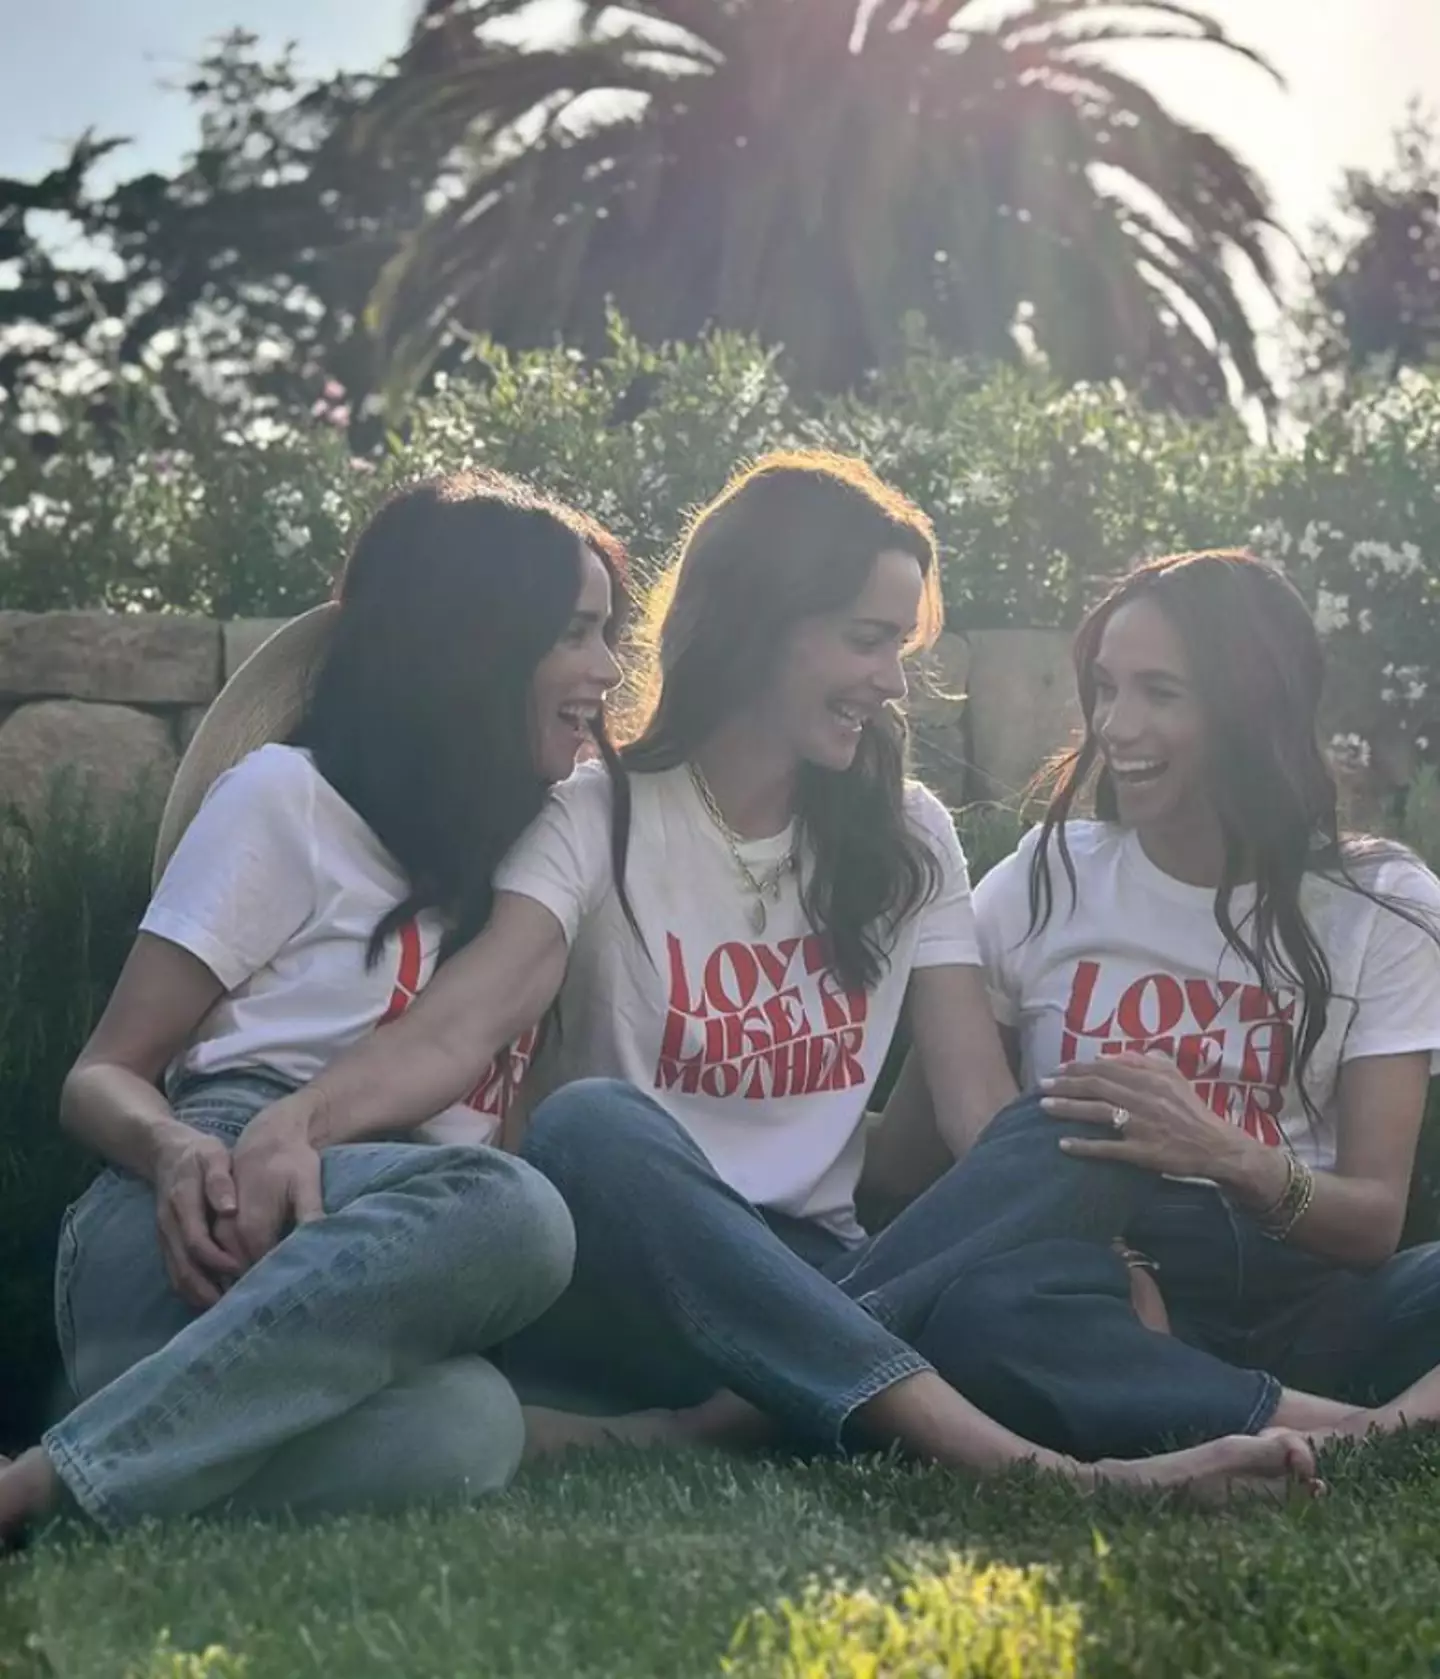 The trio donned t-shirts which said 'Love Like a Mother'. (Instagram/@_heartmom_/allianceofmoms)